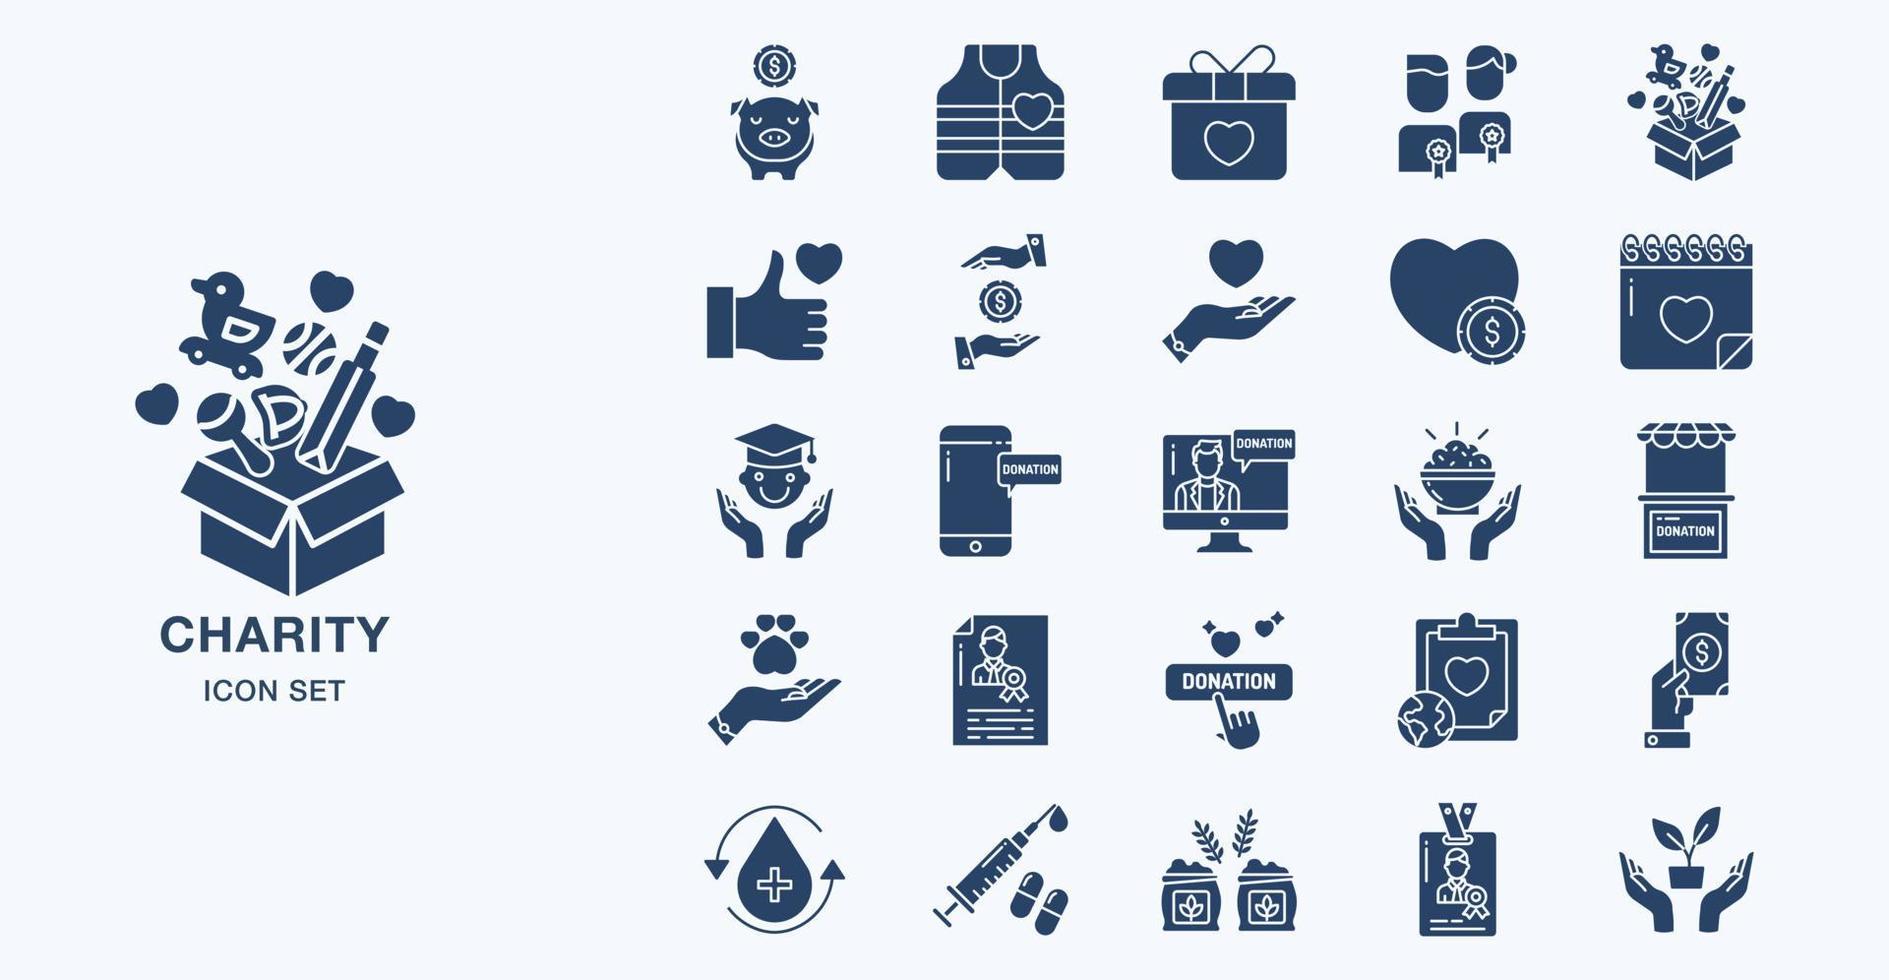 Donation and Charity solid icon set vector